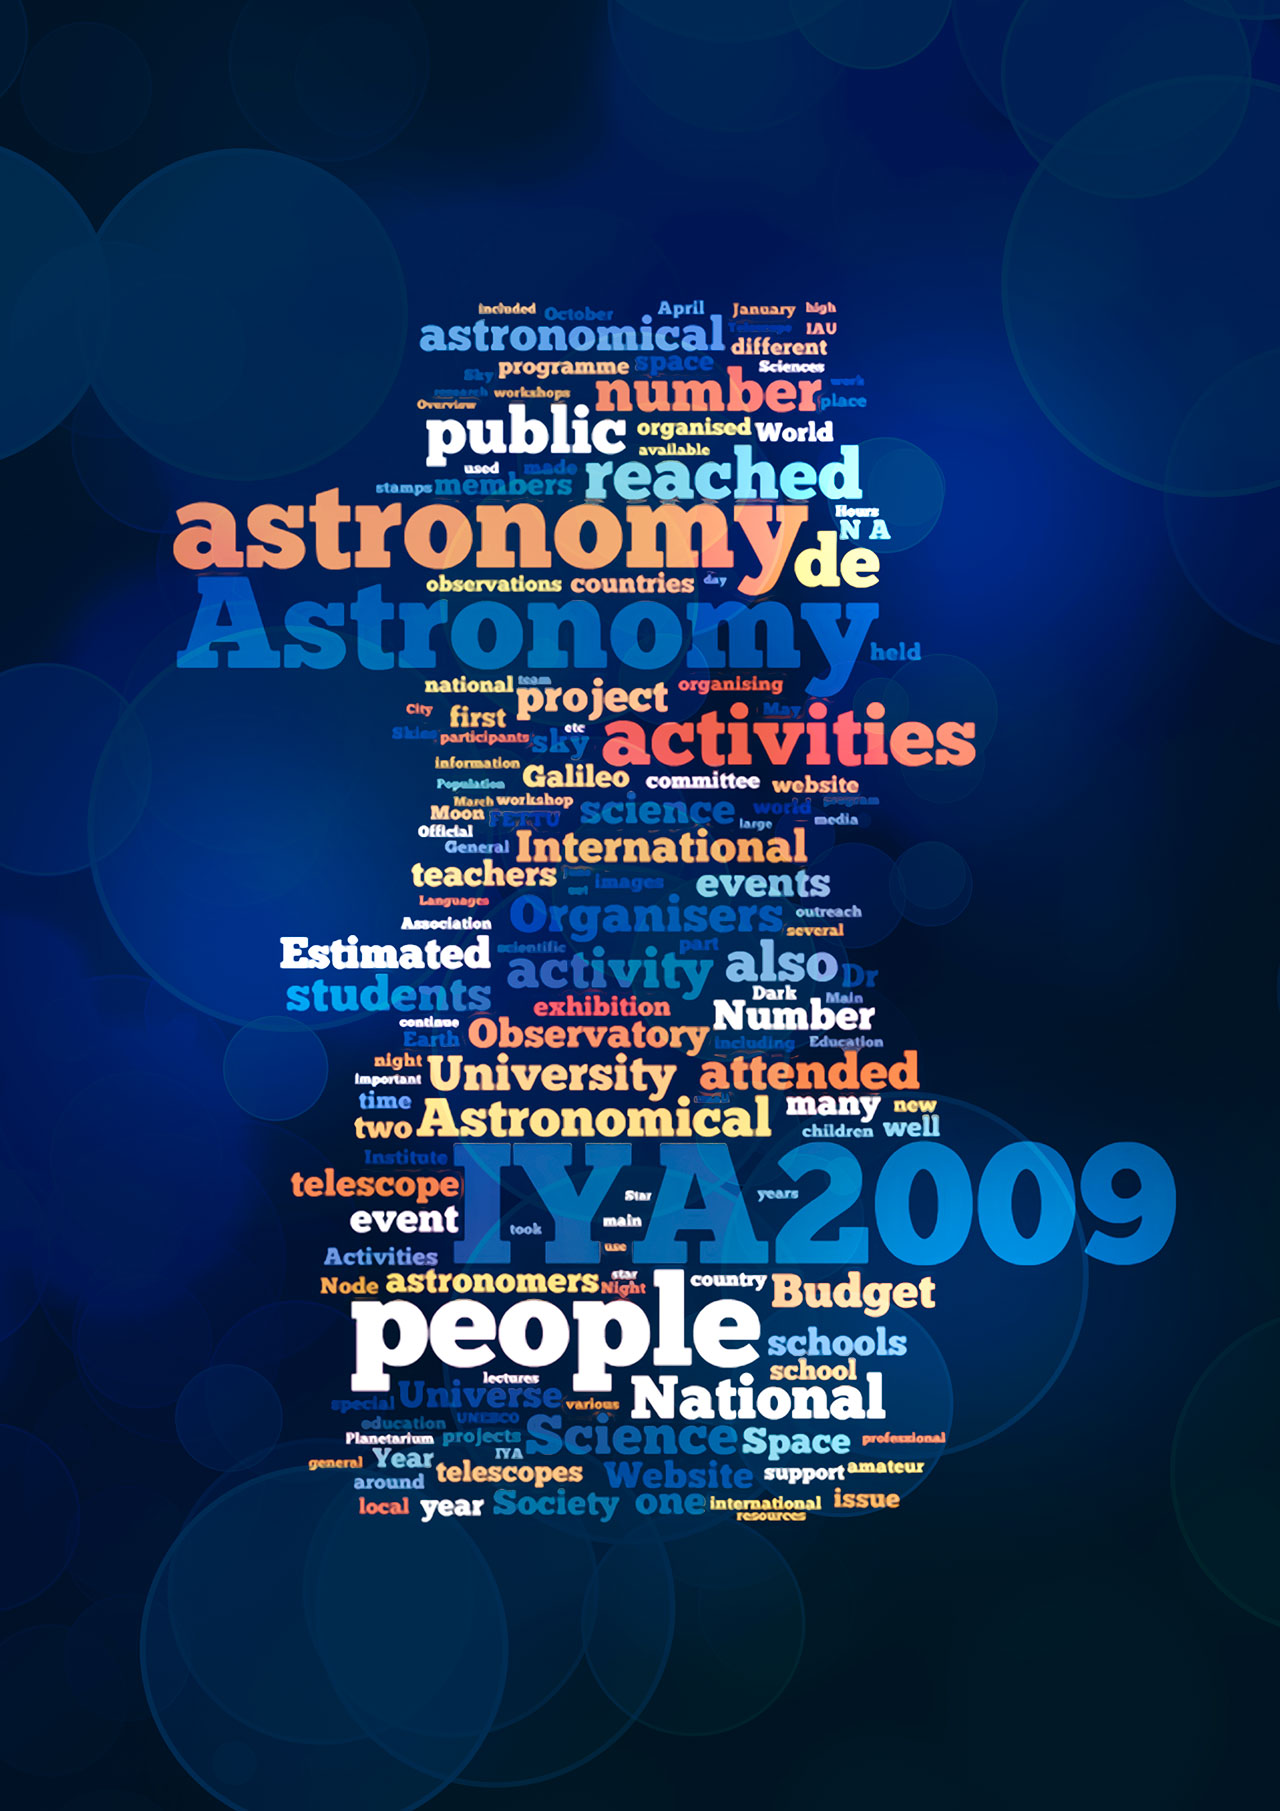 Word Cloud for the International Year of Astronomy 2009 Final Report